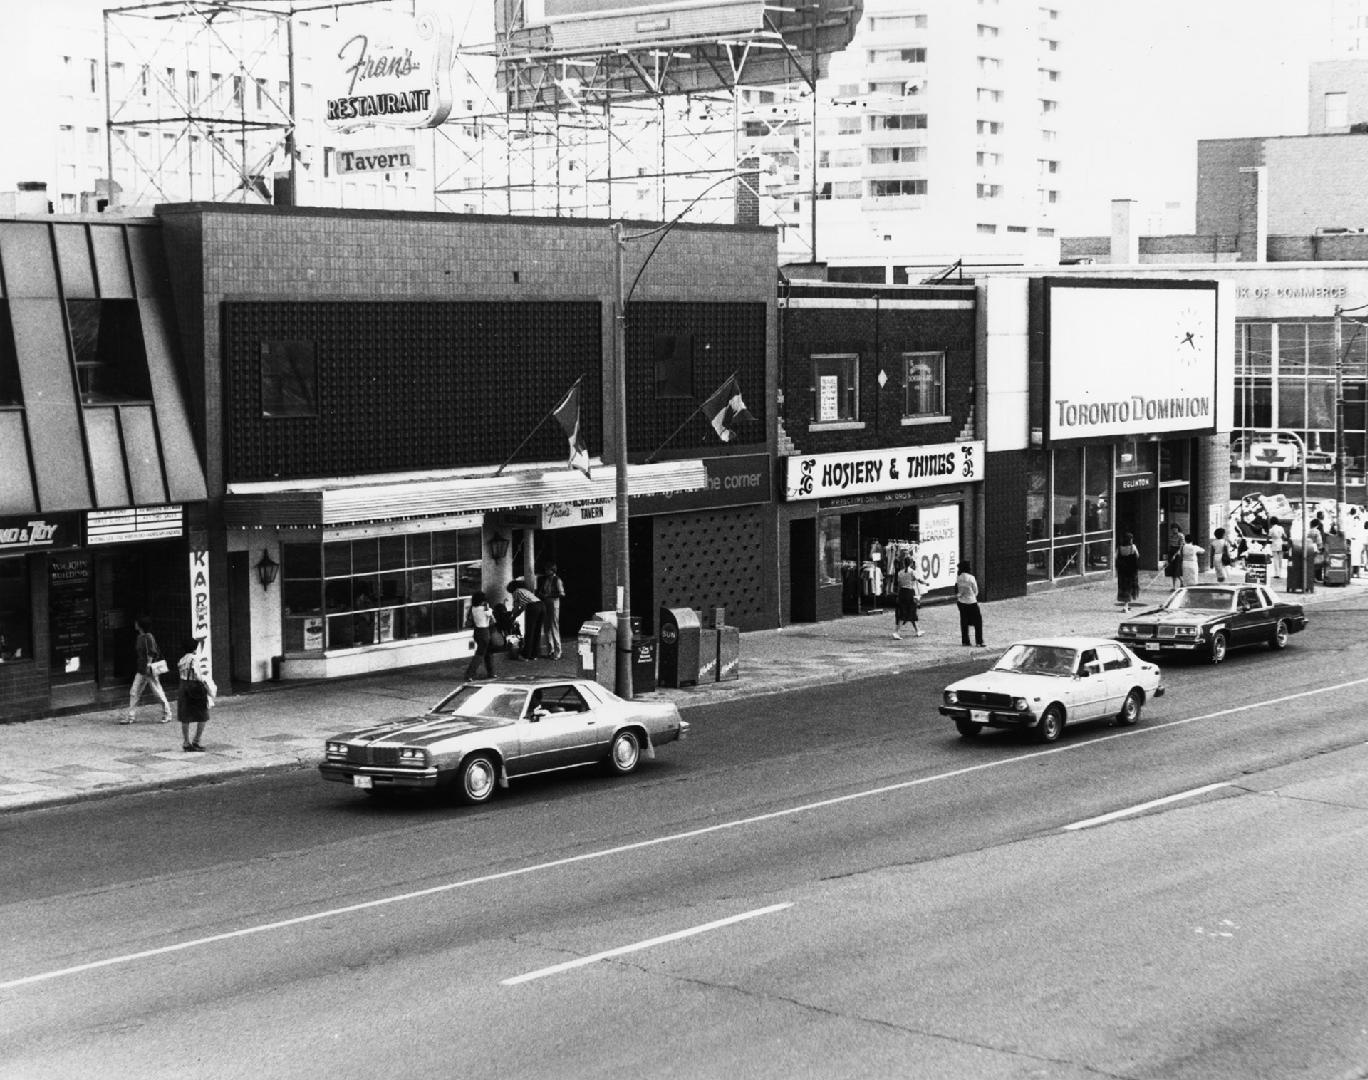 Yonge-Eglinton Intersection, east side of Yonge. Image shows mostly Yonge street and a few cars ...